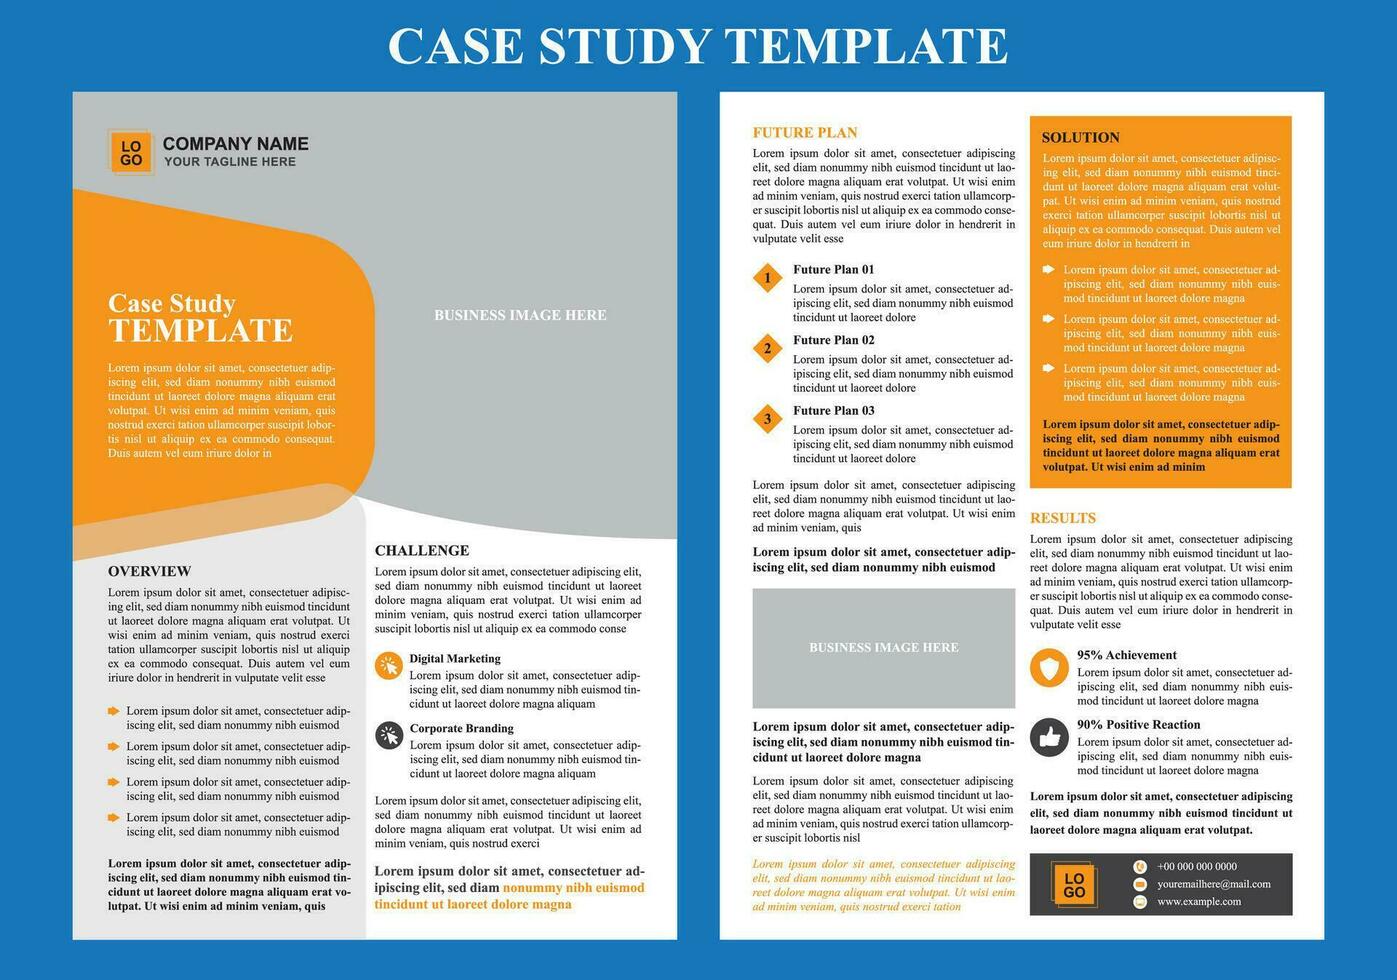 Case Study Template Design for Business vector